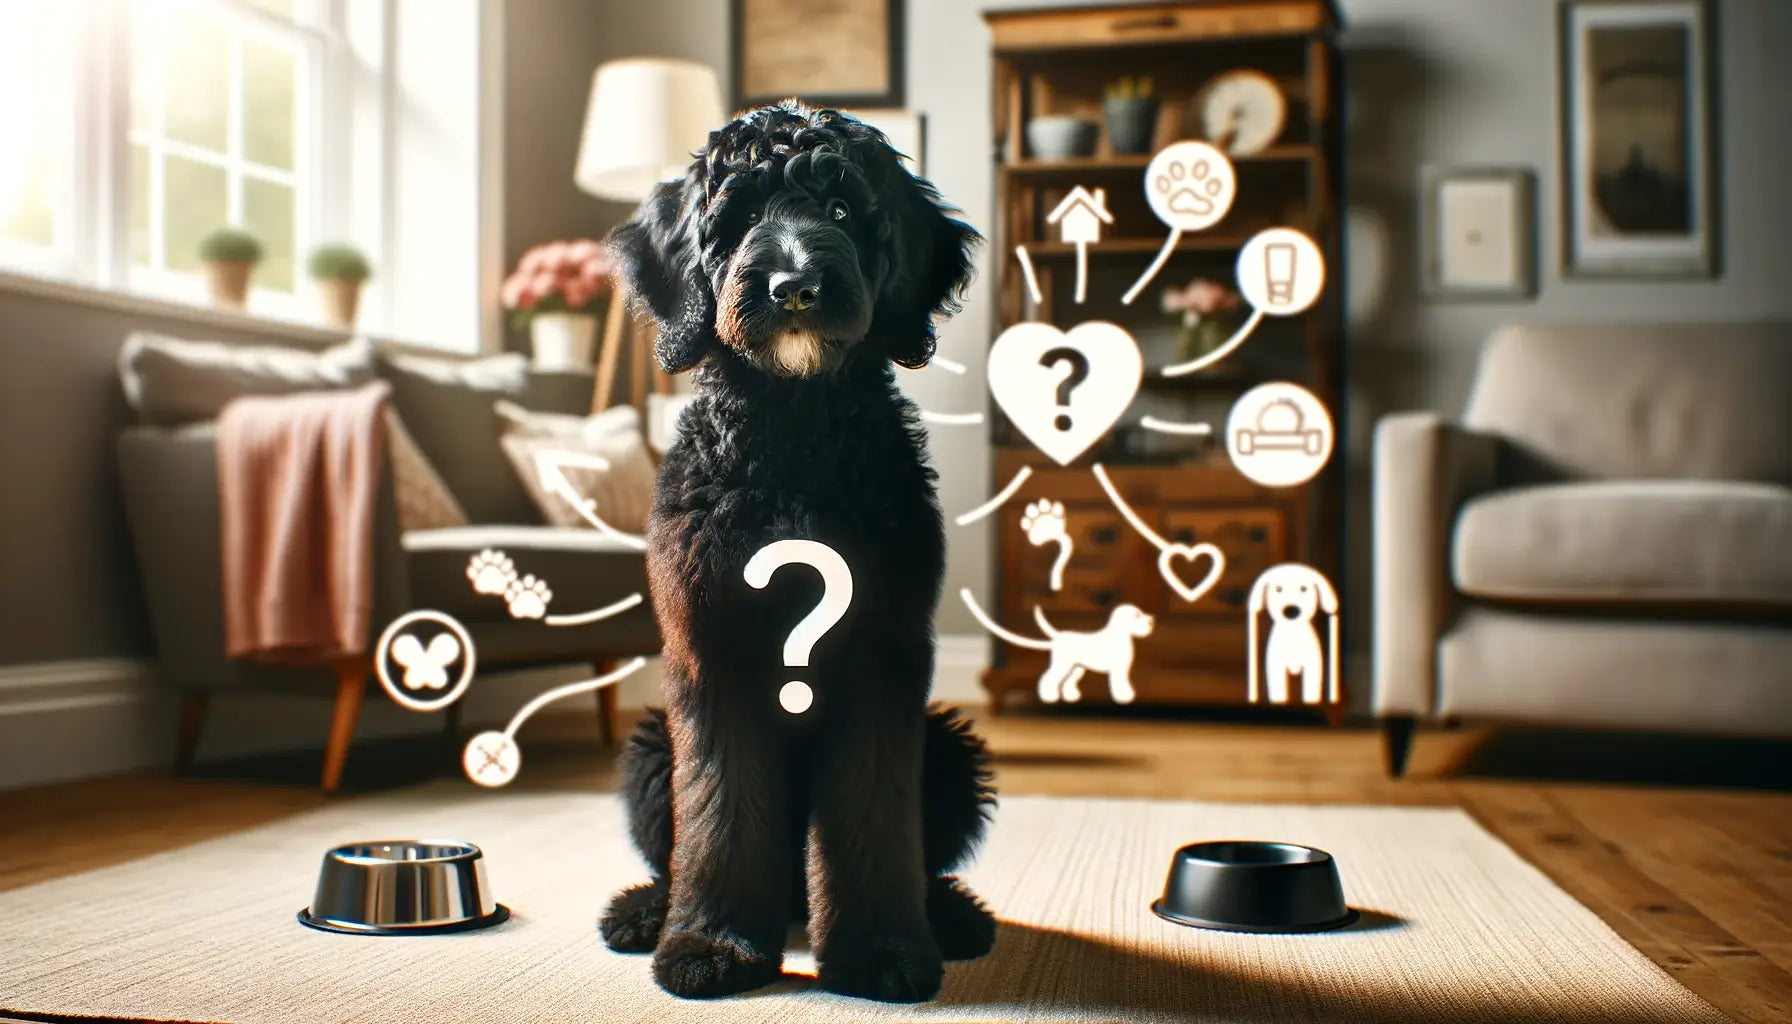 Black Goldendoodle with a question mark above its head, symbolizing common inquiries about the breed.